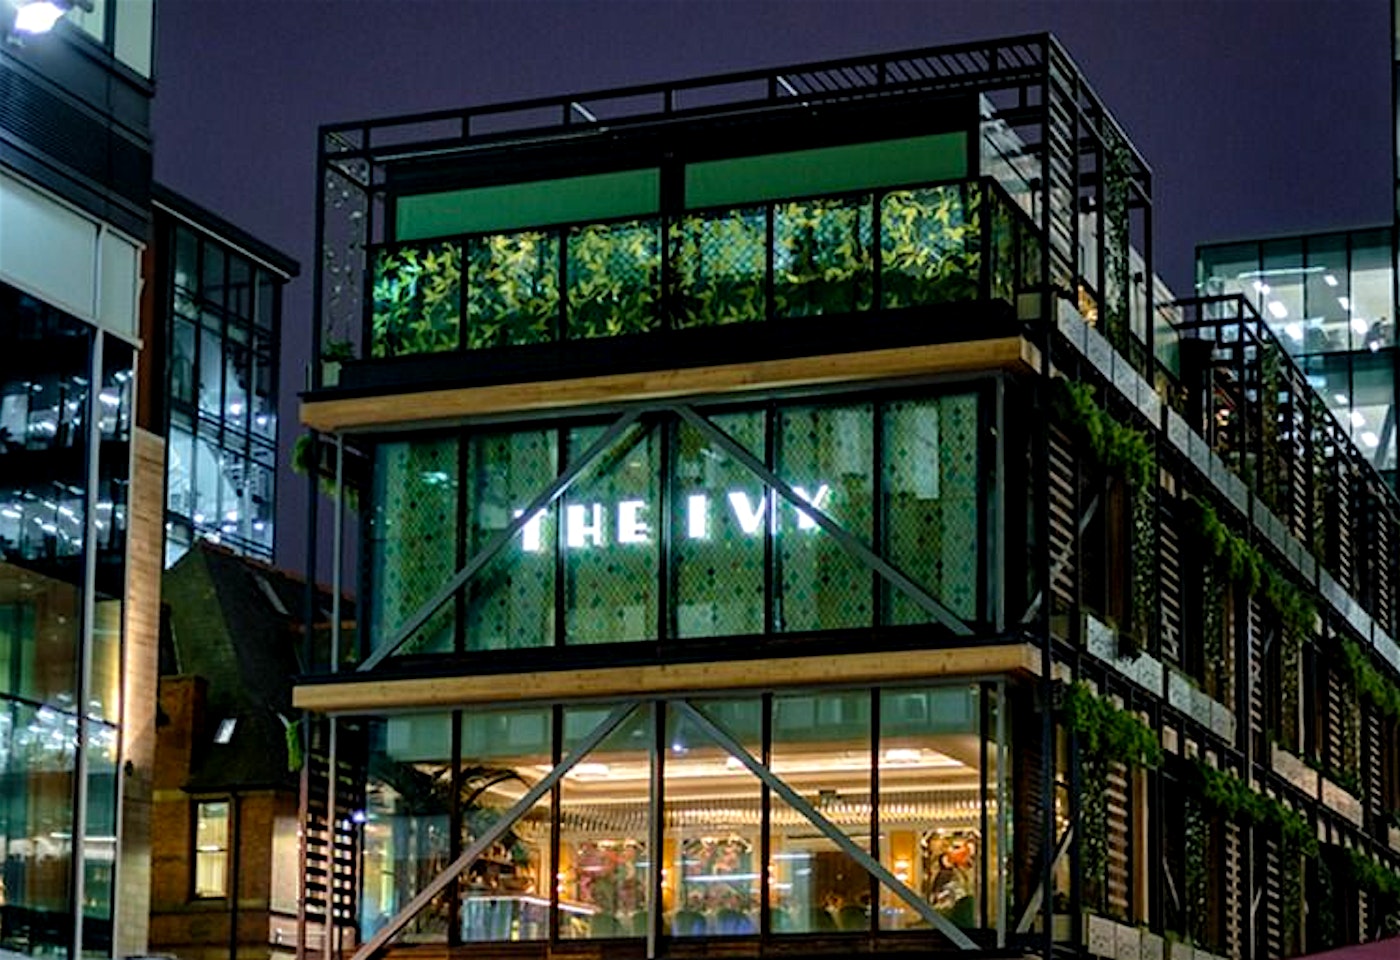 the ivy manchester spinningfields 2